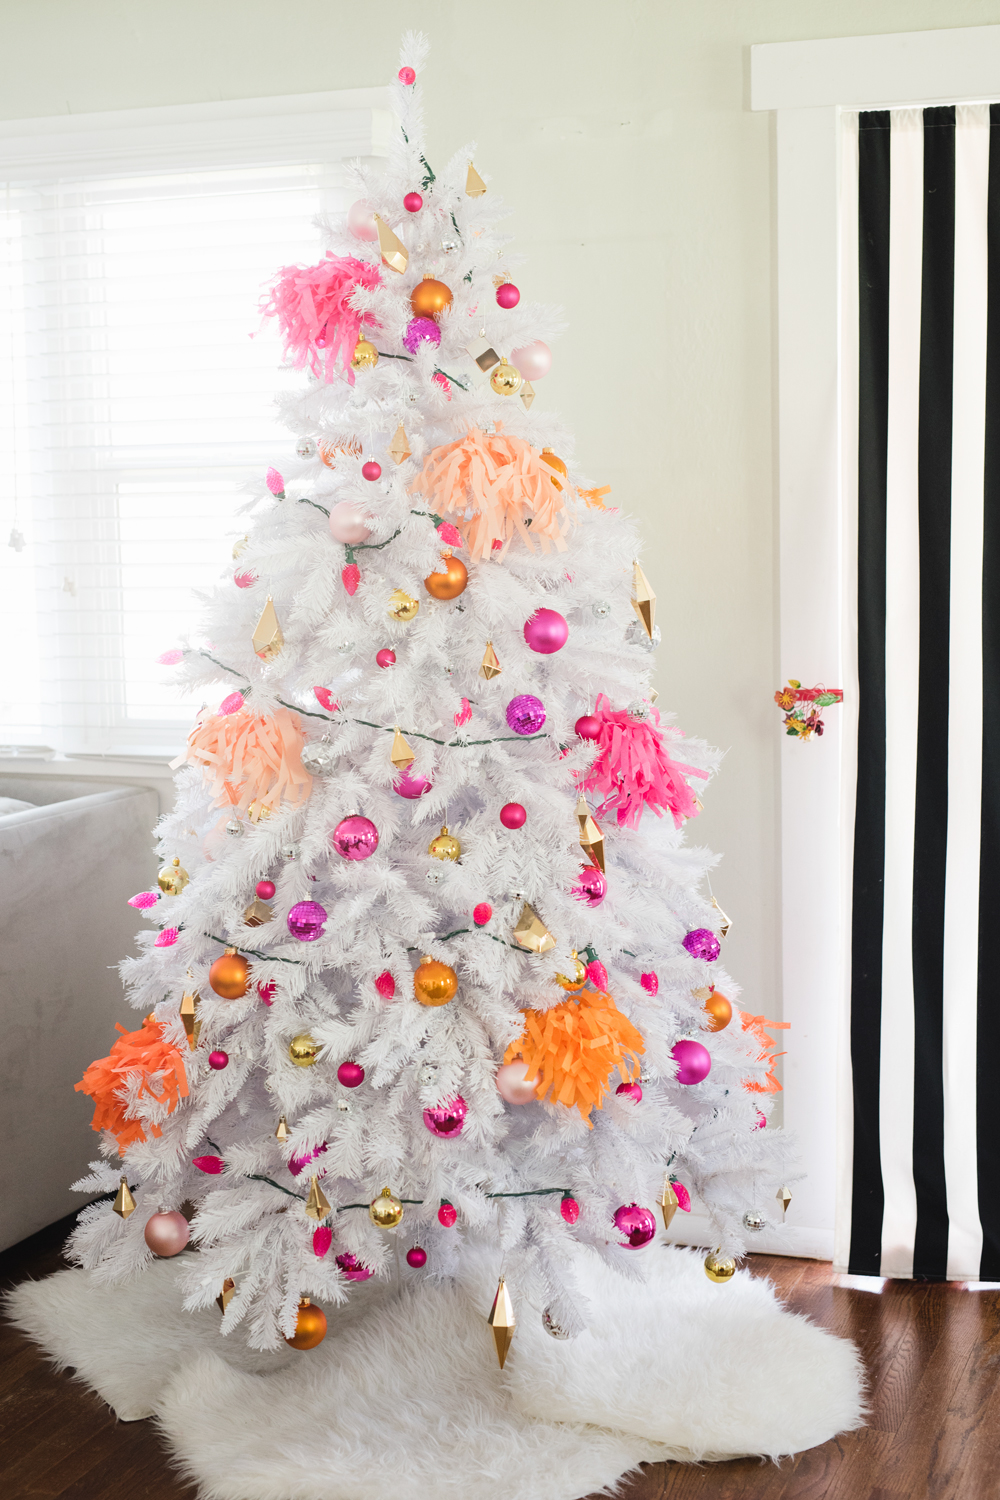 29 Ways To Make The Holidays Magical (Not Commercial) | A Practical Wedding